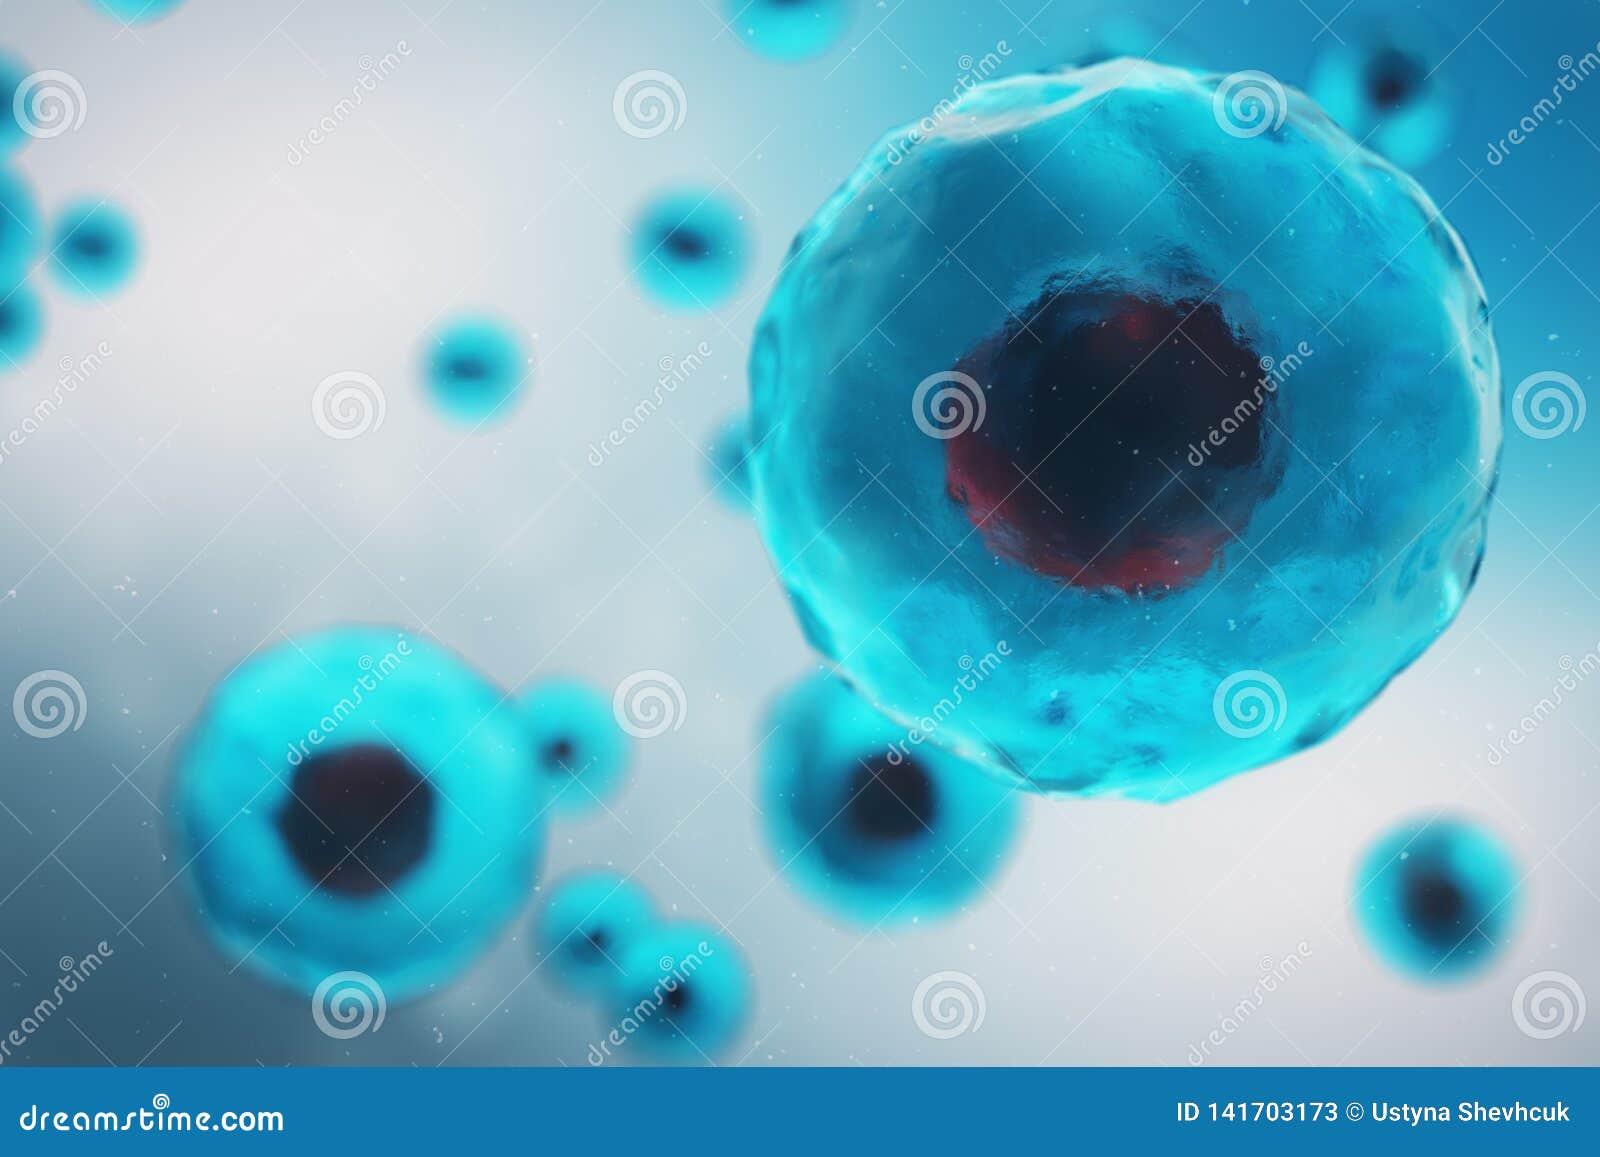 Human Cells or Animal. Cell Colony Stock Illustration - Illustration of  microscopic, background: 141703173